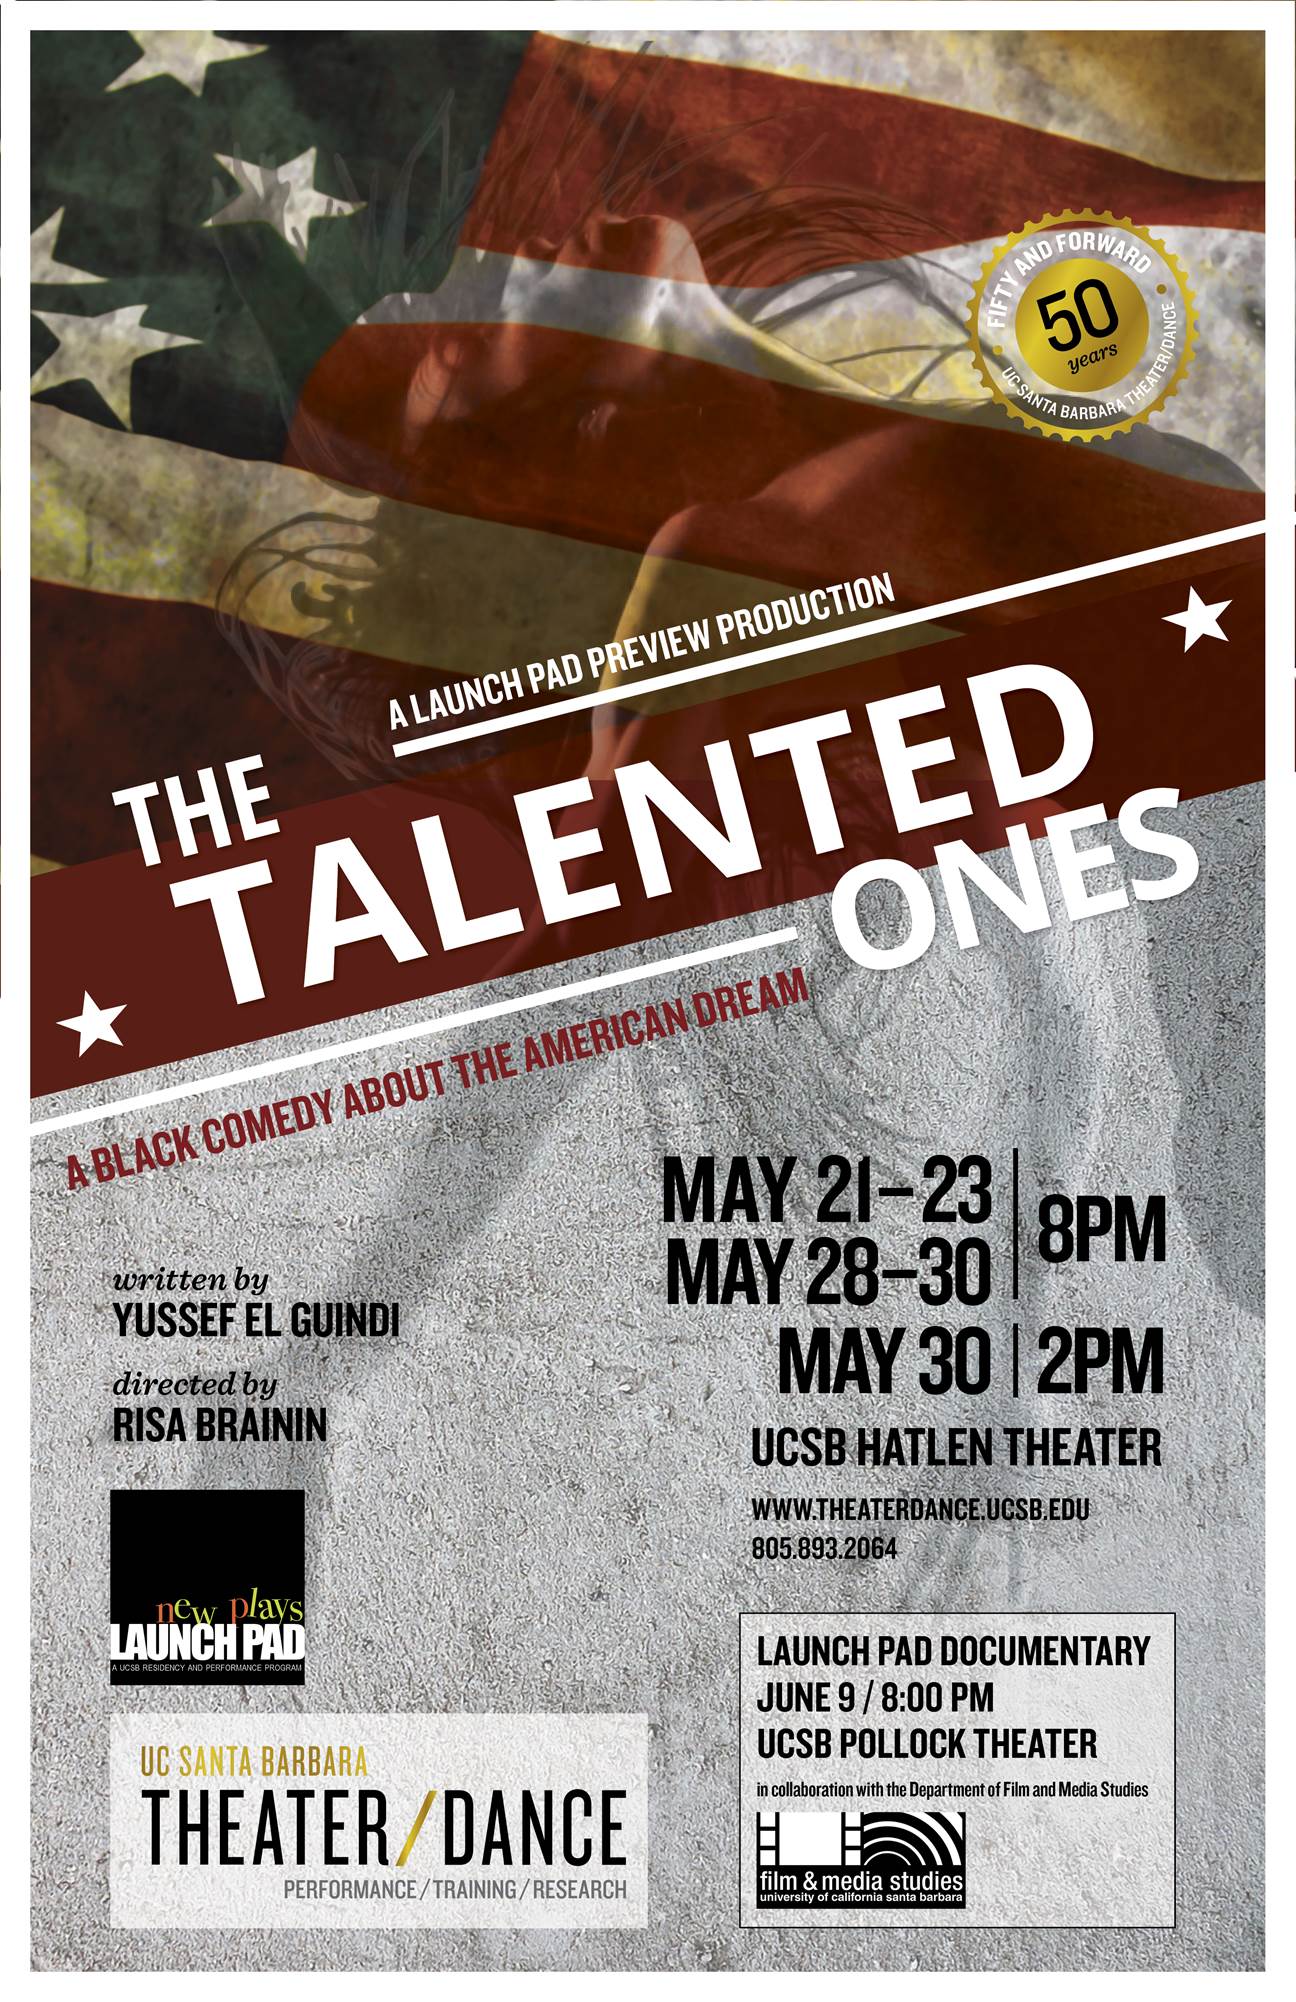 The poster for the Talented Ones, featuring a ballet dancer superimposed on an American flag.